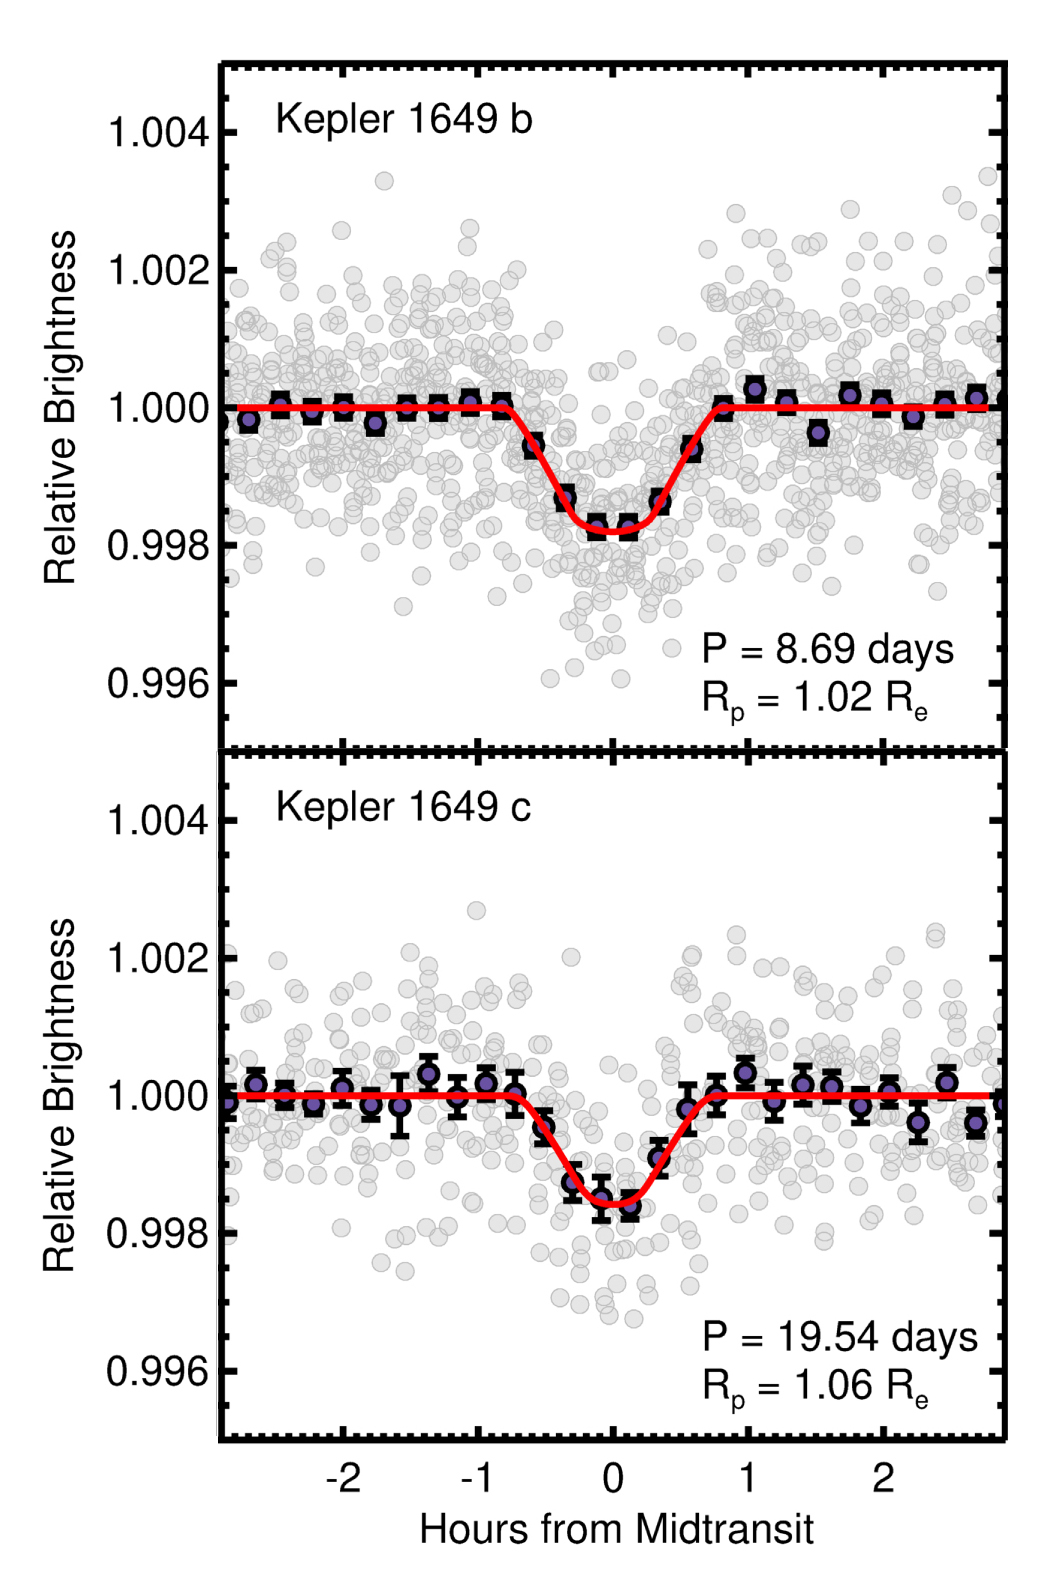 Transits from Kepler 1649b and c